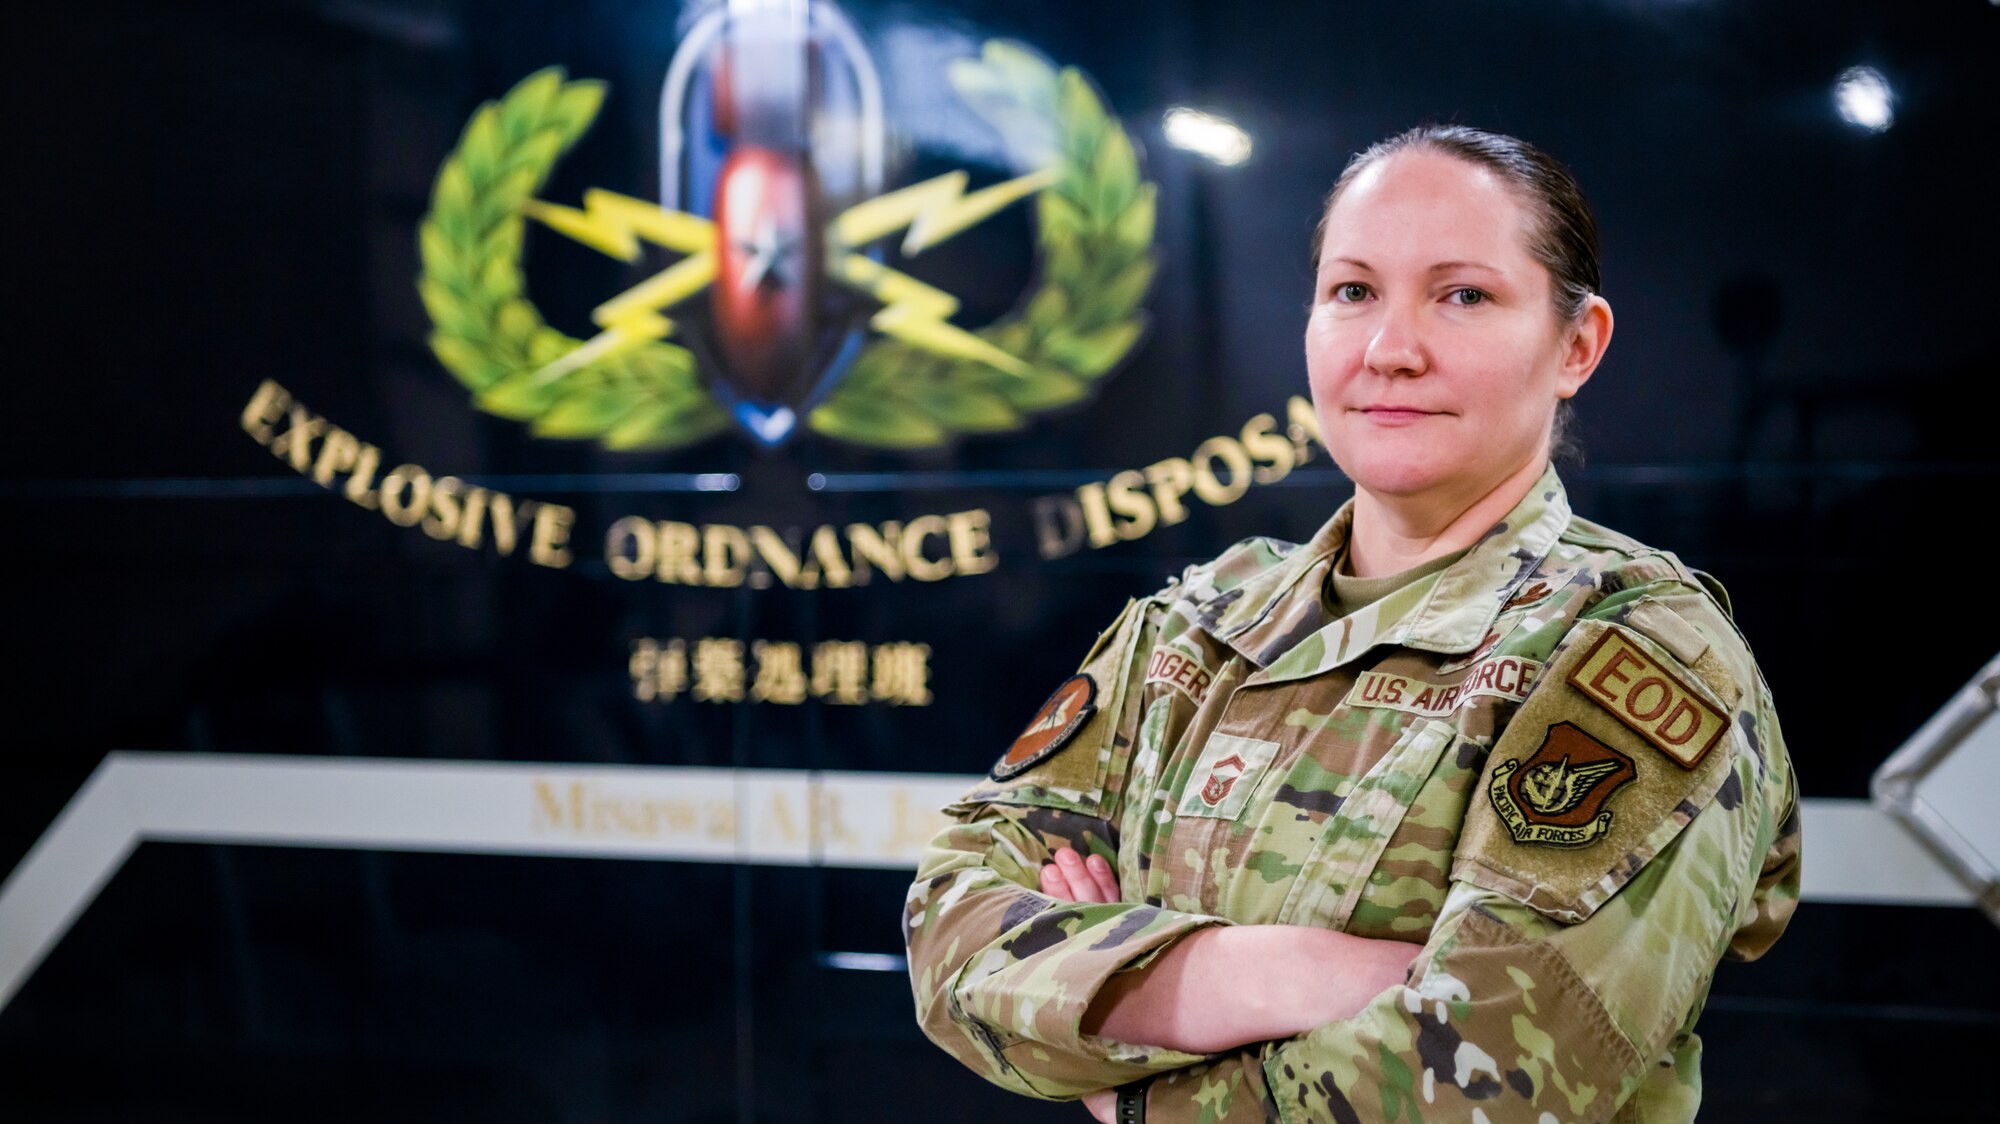 U.S. Air Force Senior Master Sgt. Diana Rogers, 35th Civil Engineer Squadron, Explosive Ordnance Disposal (EOD) superintendent, poses in front of a utility vehicle at Misawa Air Base, Japan, March 31, 2023. Rogers was selected for promotion to chief master sergeant, becoming the first female E-9 in the EOD career field in over 30 years. (U.S. Air Force photo by Staff Sgt. Kristen Heller)